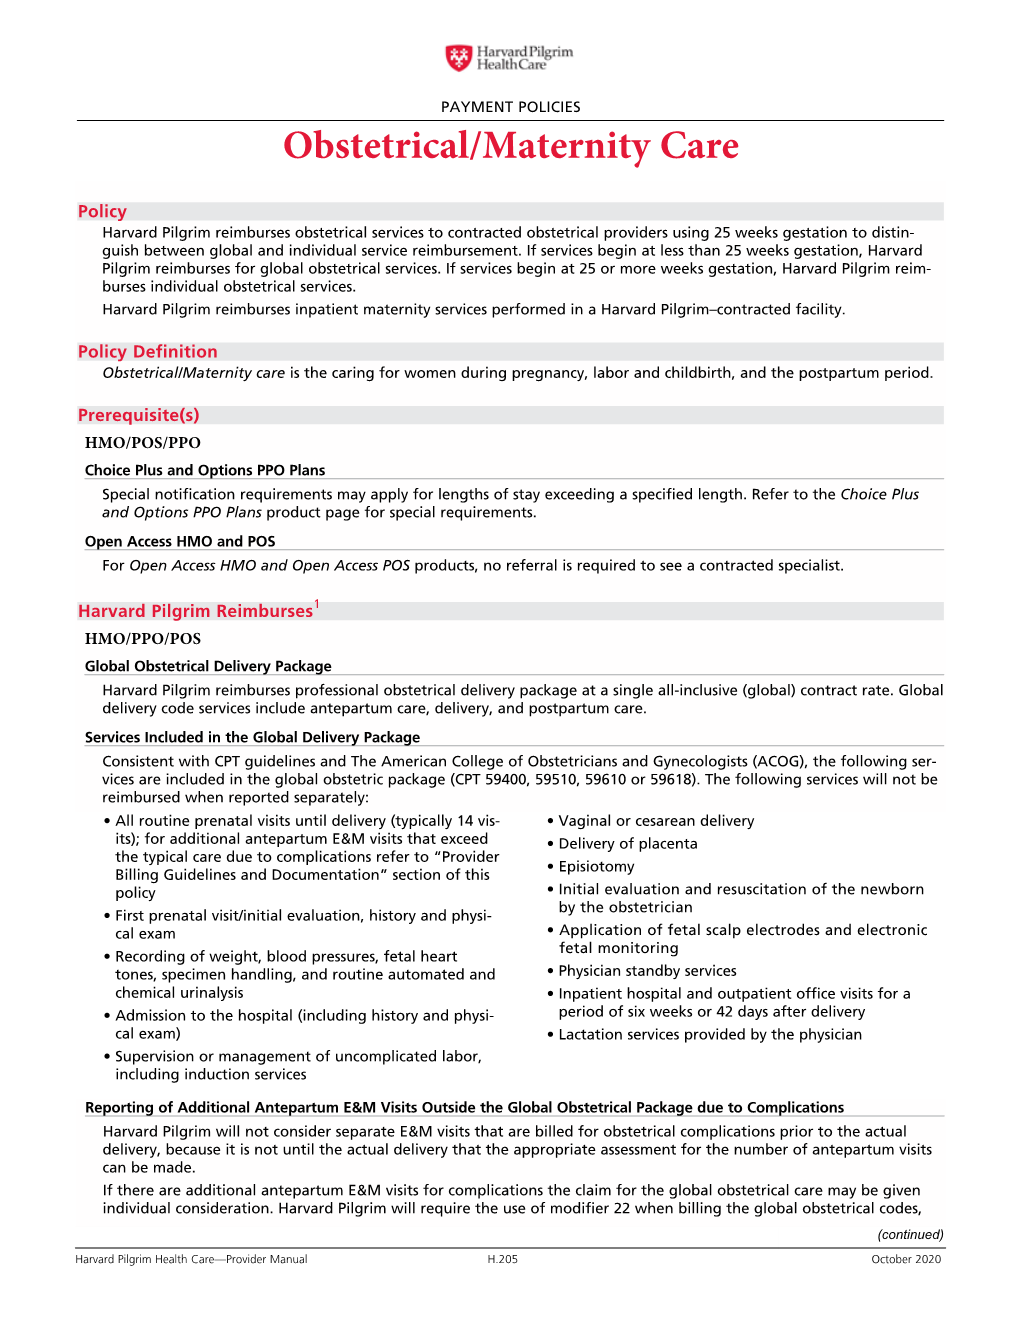 Obstetrical/Maternity Care Payment Policy